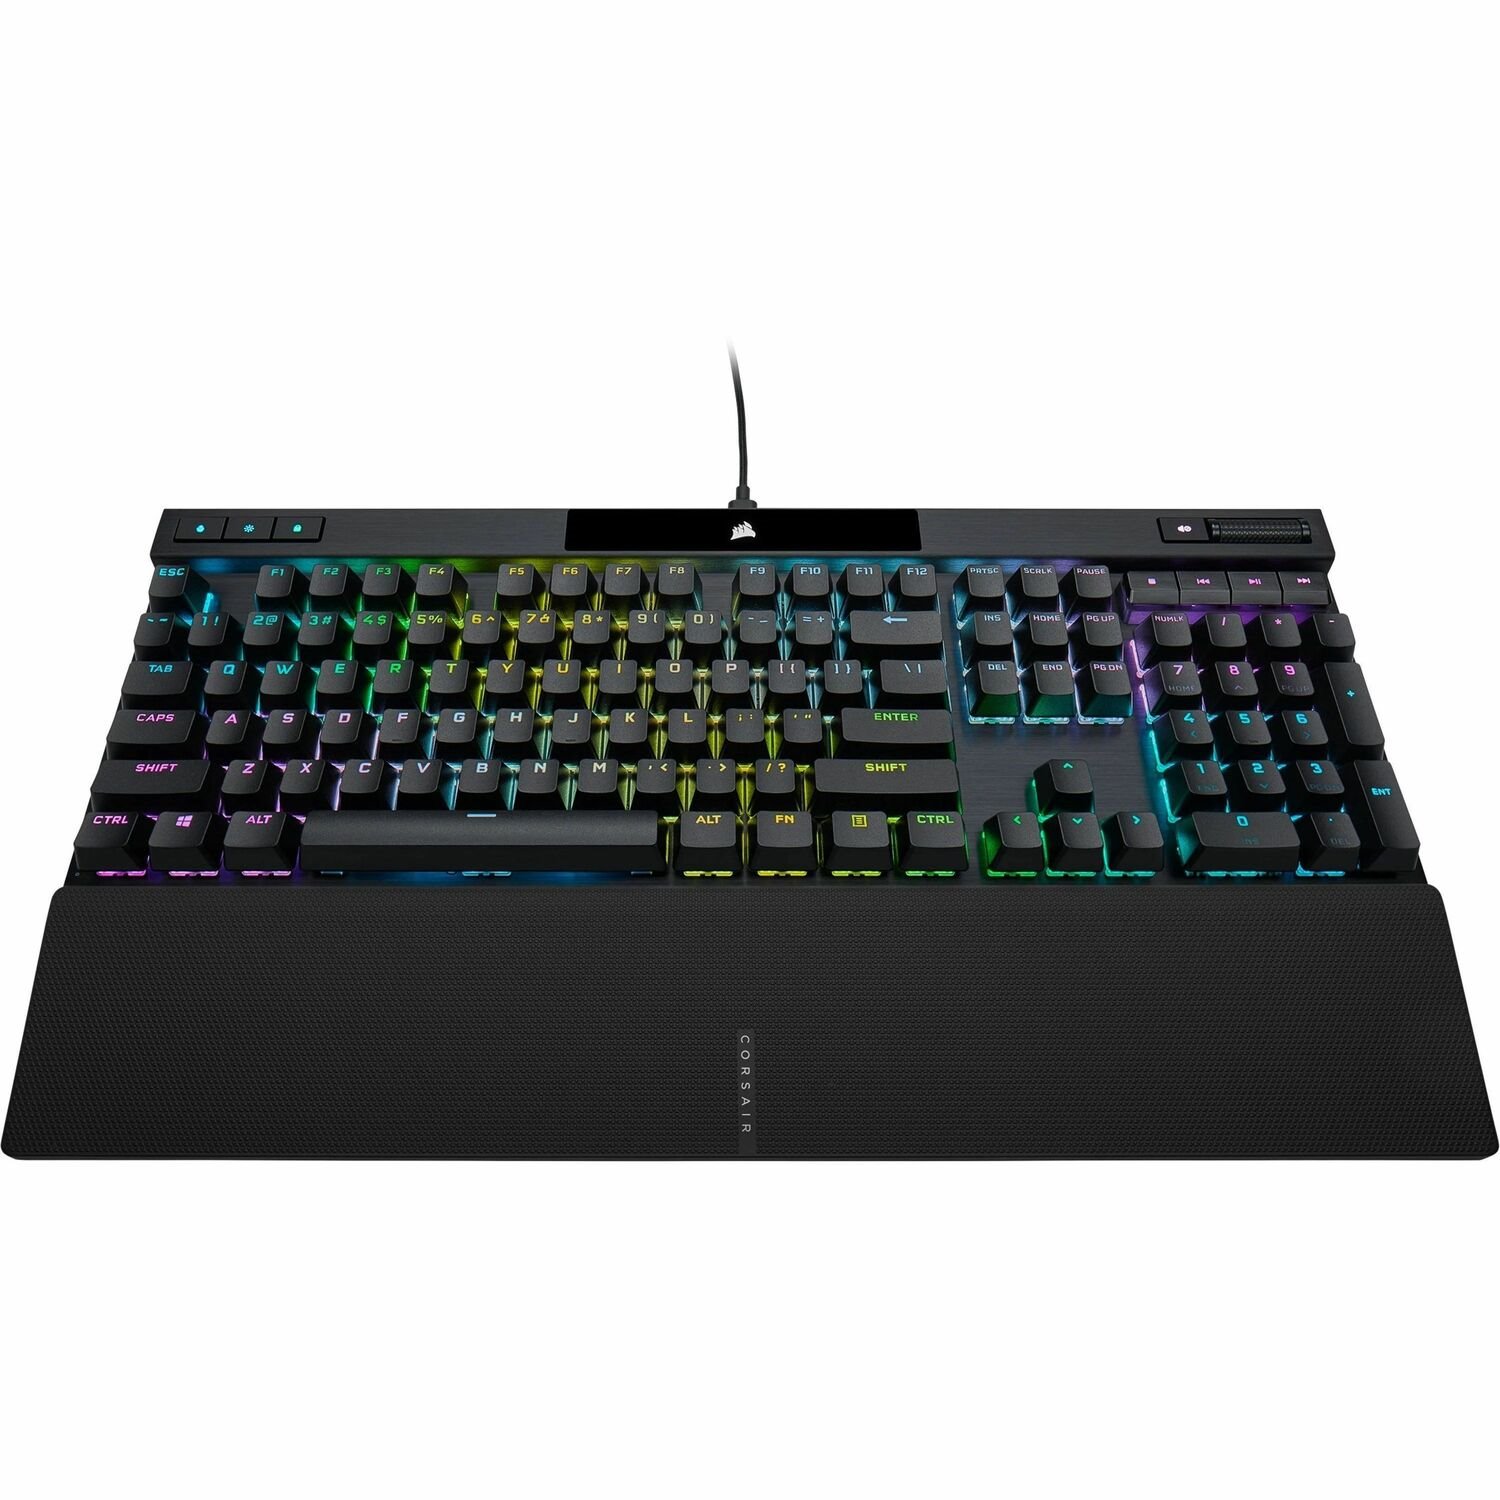 Corsair K70 Gaming Keyboard - Cable Connectivity - USB Type A Interface - RGB LED - English (North America) - Black